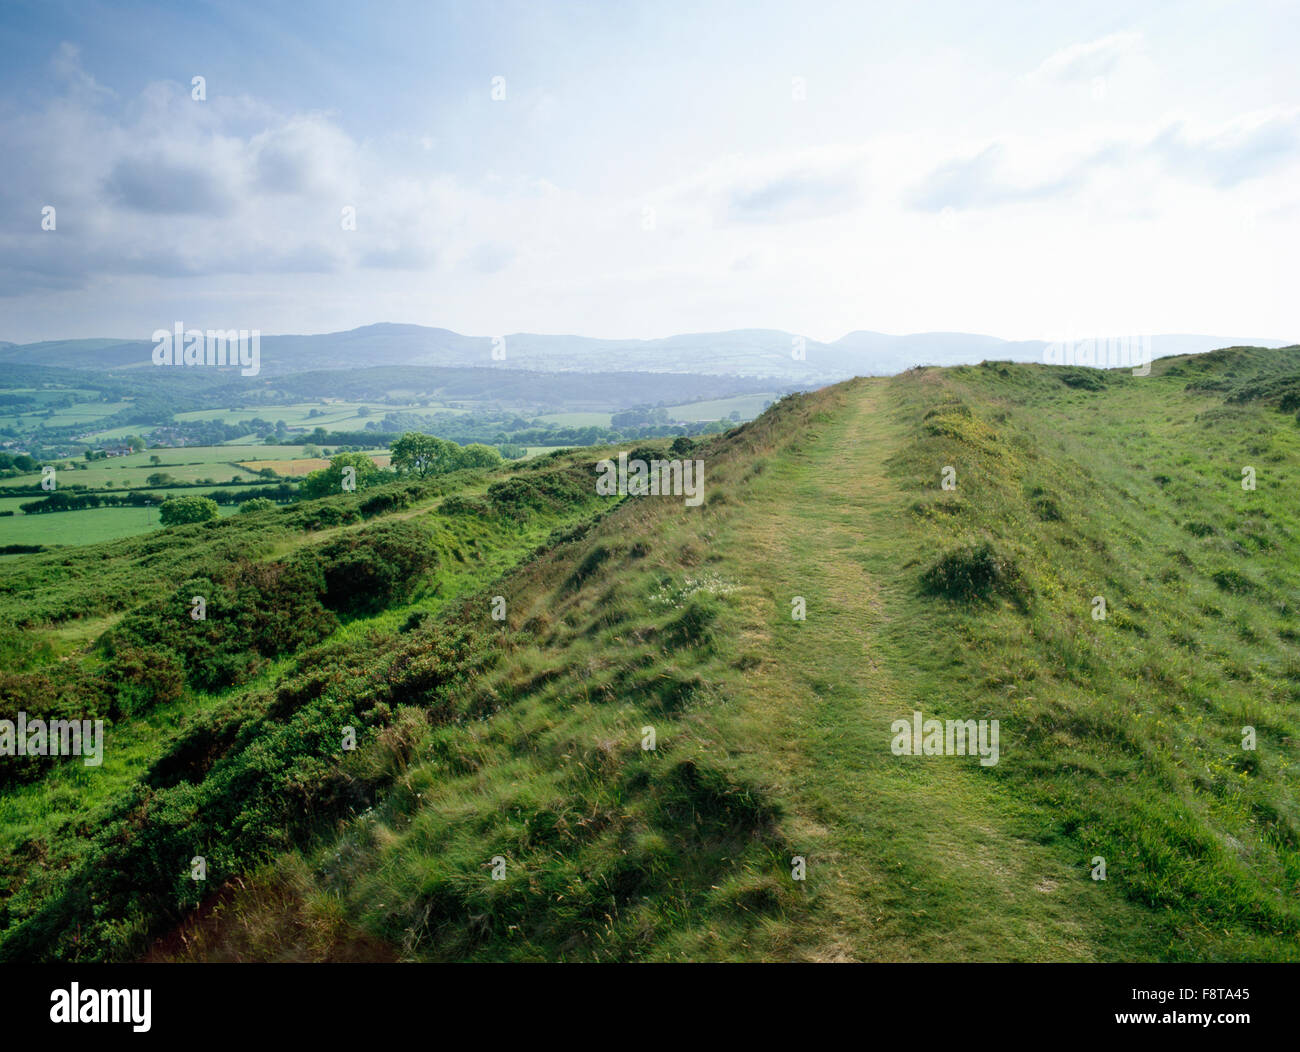 Inner rampart with outer ditch & counterscarp bank of Moel y Gaer (Rhosesmor) hillfort, Flintshire, looking SW to the Clwydian Range of hills. Stock Photo